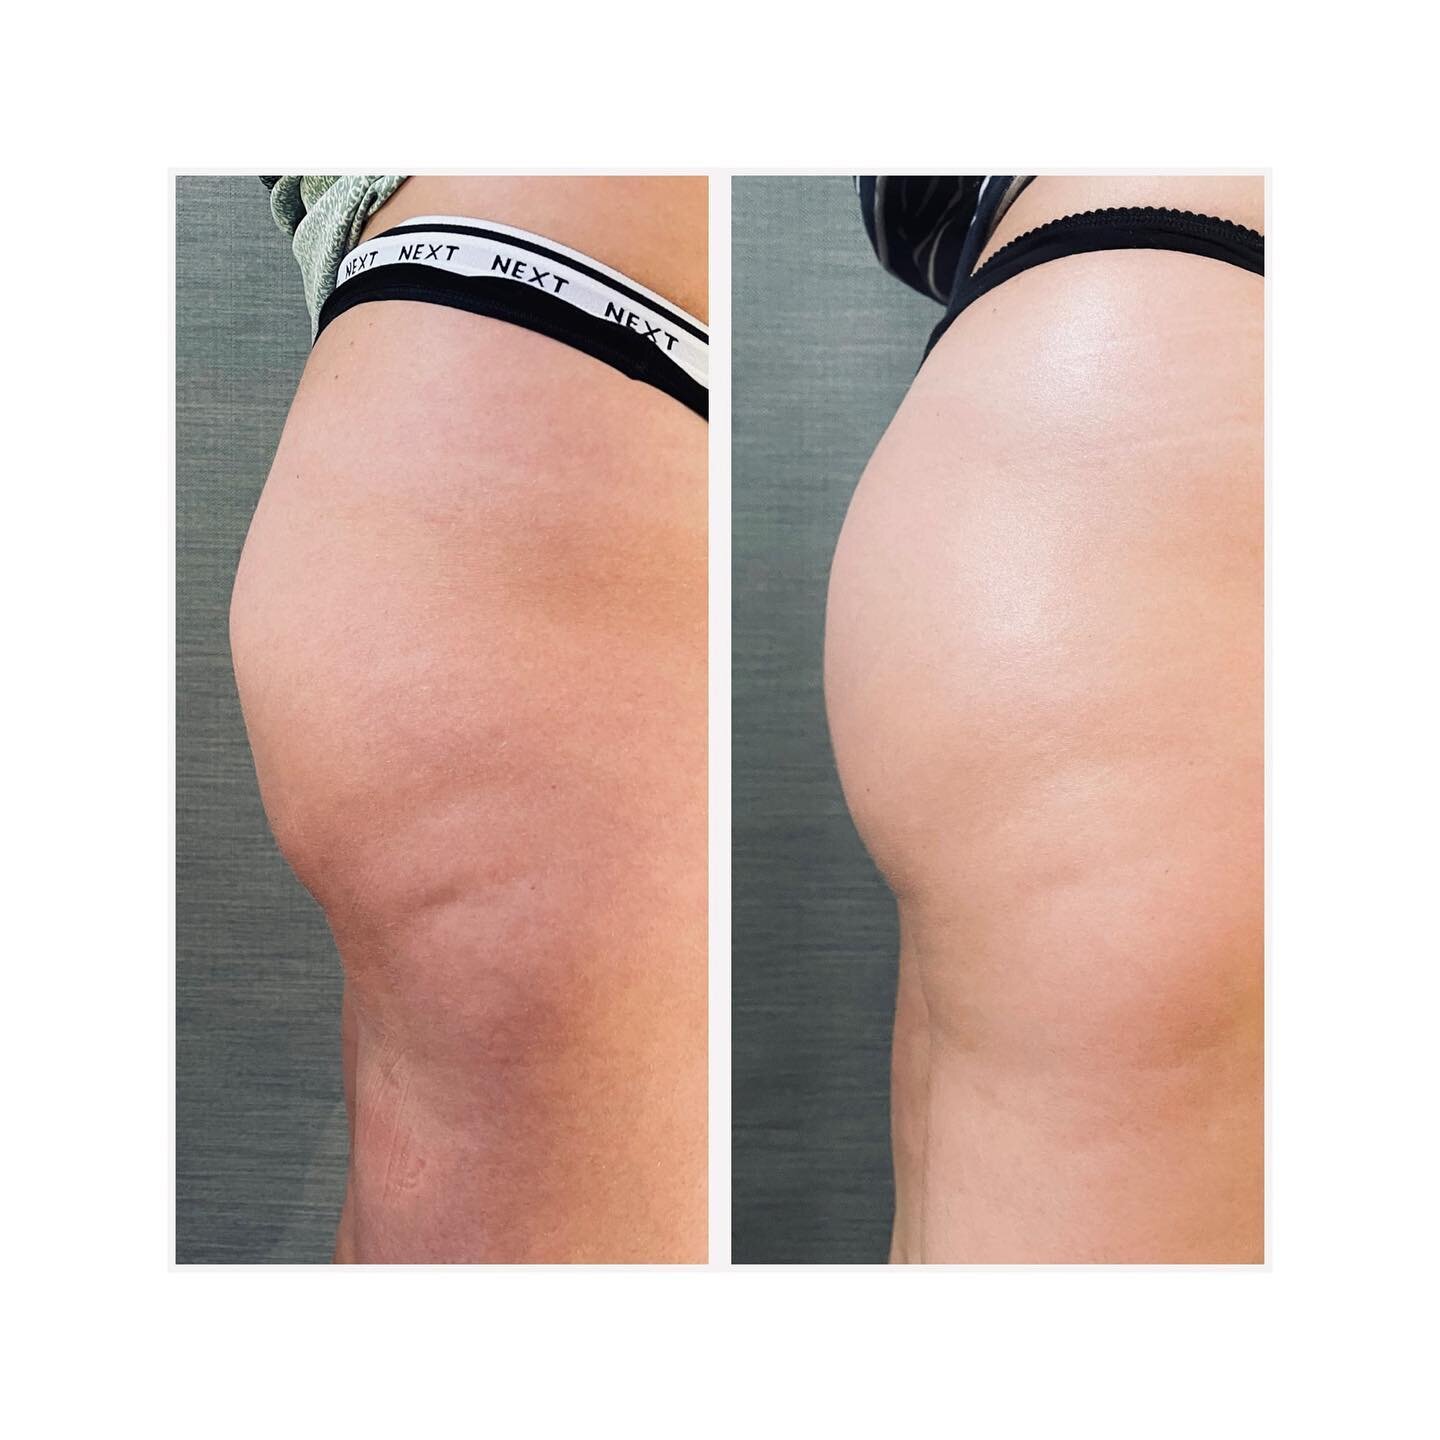 A nice little bum lift 🍑 
You can see how the skin is tighter, smoother and the shape is lifted. 
This was achieved after only 4 treatments. 
There&rsquo;s still time to get your body ready for the beach 👙 

To book please contact me for a free con